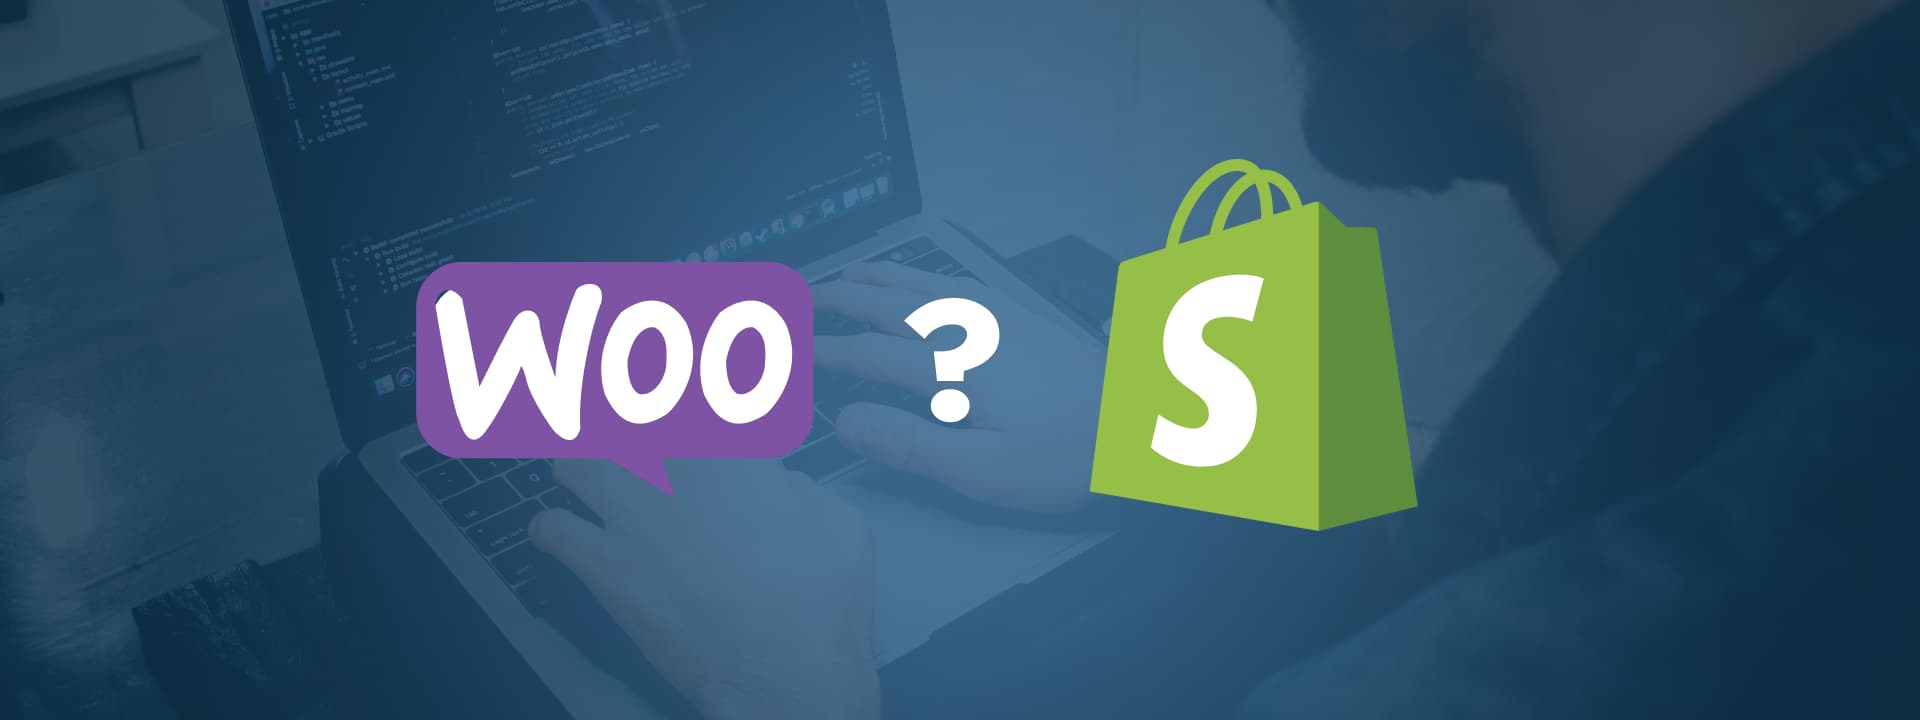 How To Migrate From WooCommerce to Shopify (Data Checklist, Approaches, Tips, and Pros and Cons)